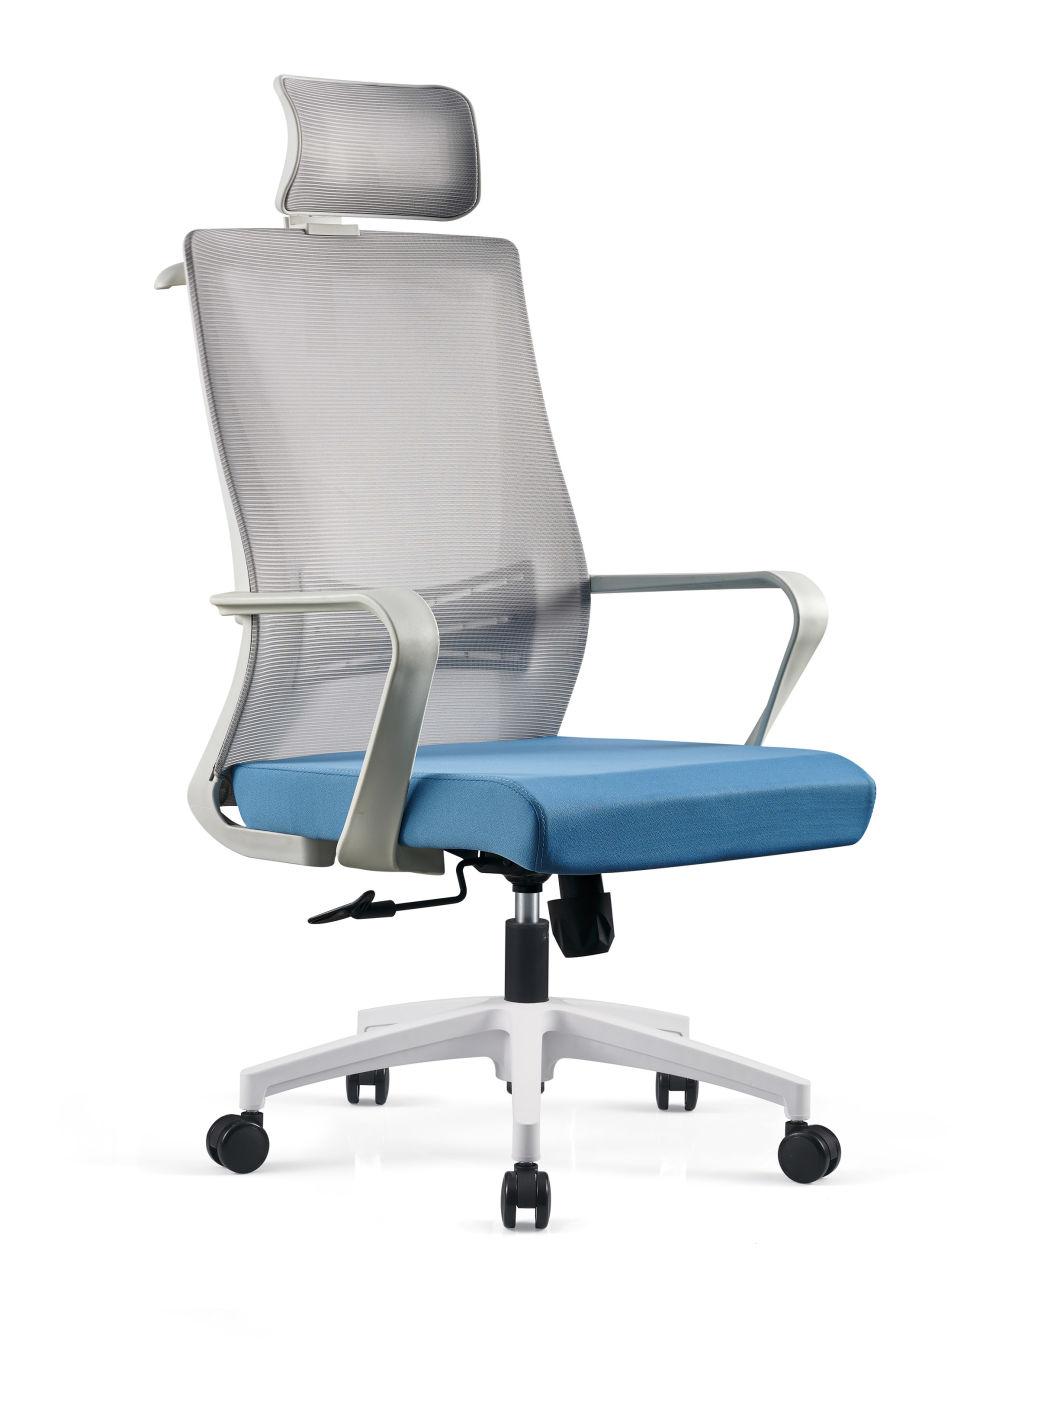 Breathable Mesh Fabric Office Chair with Hangers Flexible Pillow Chair